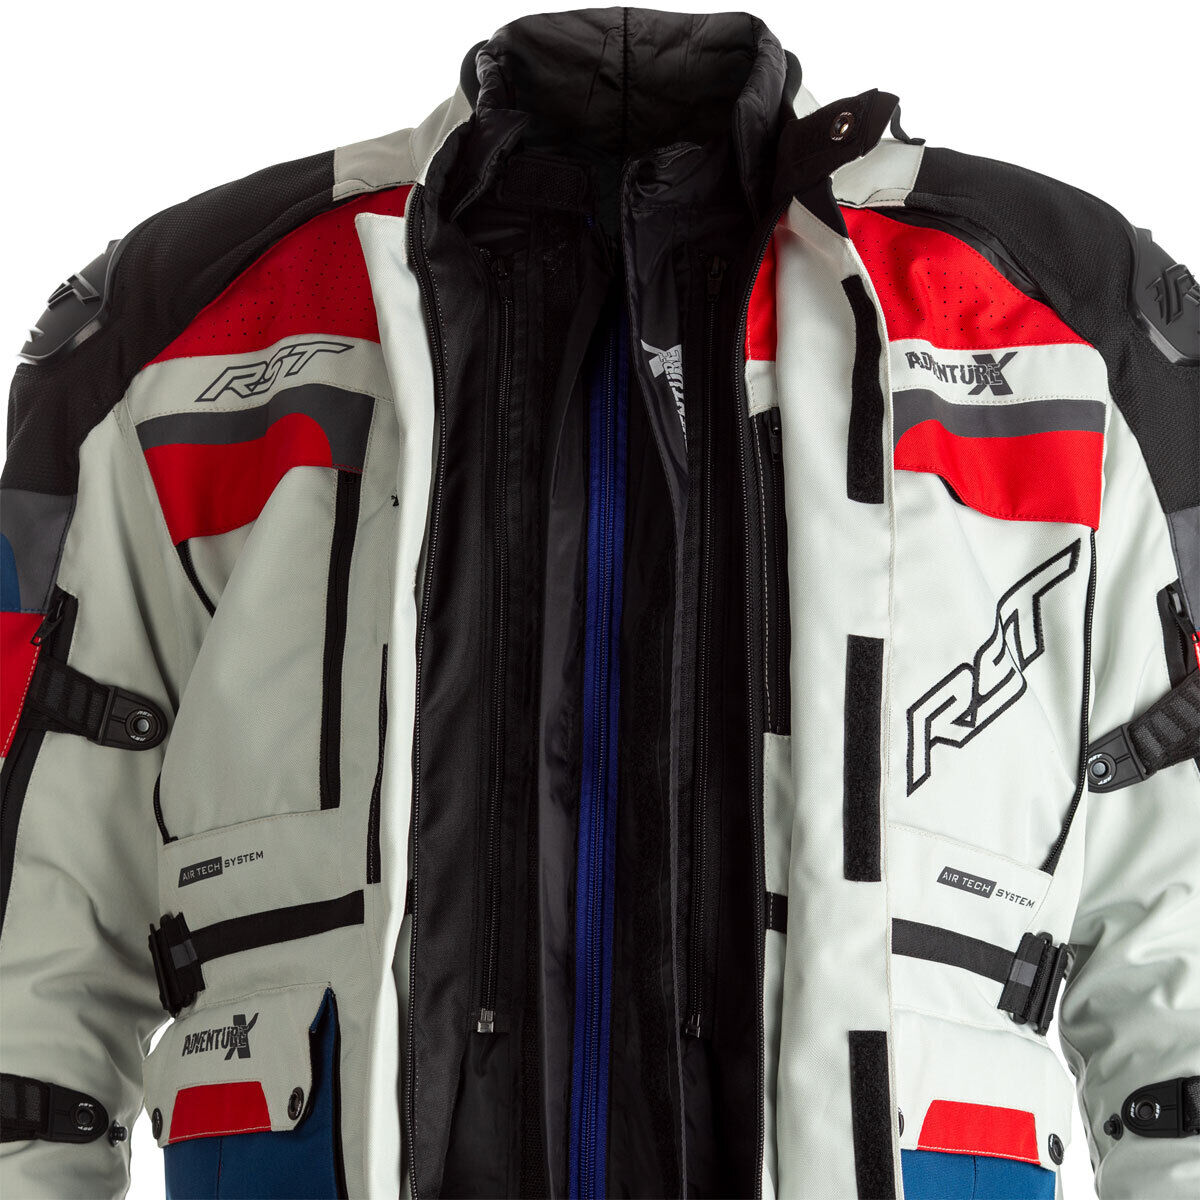 PRO SERIES ADVENTURE-X CE MENS TEXTILE JACKET - ICE BLUE RED